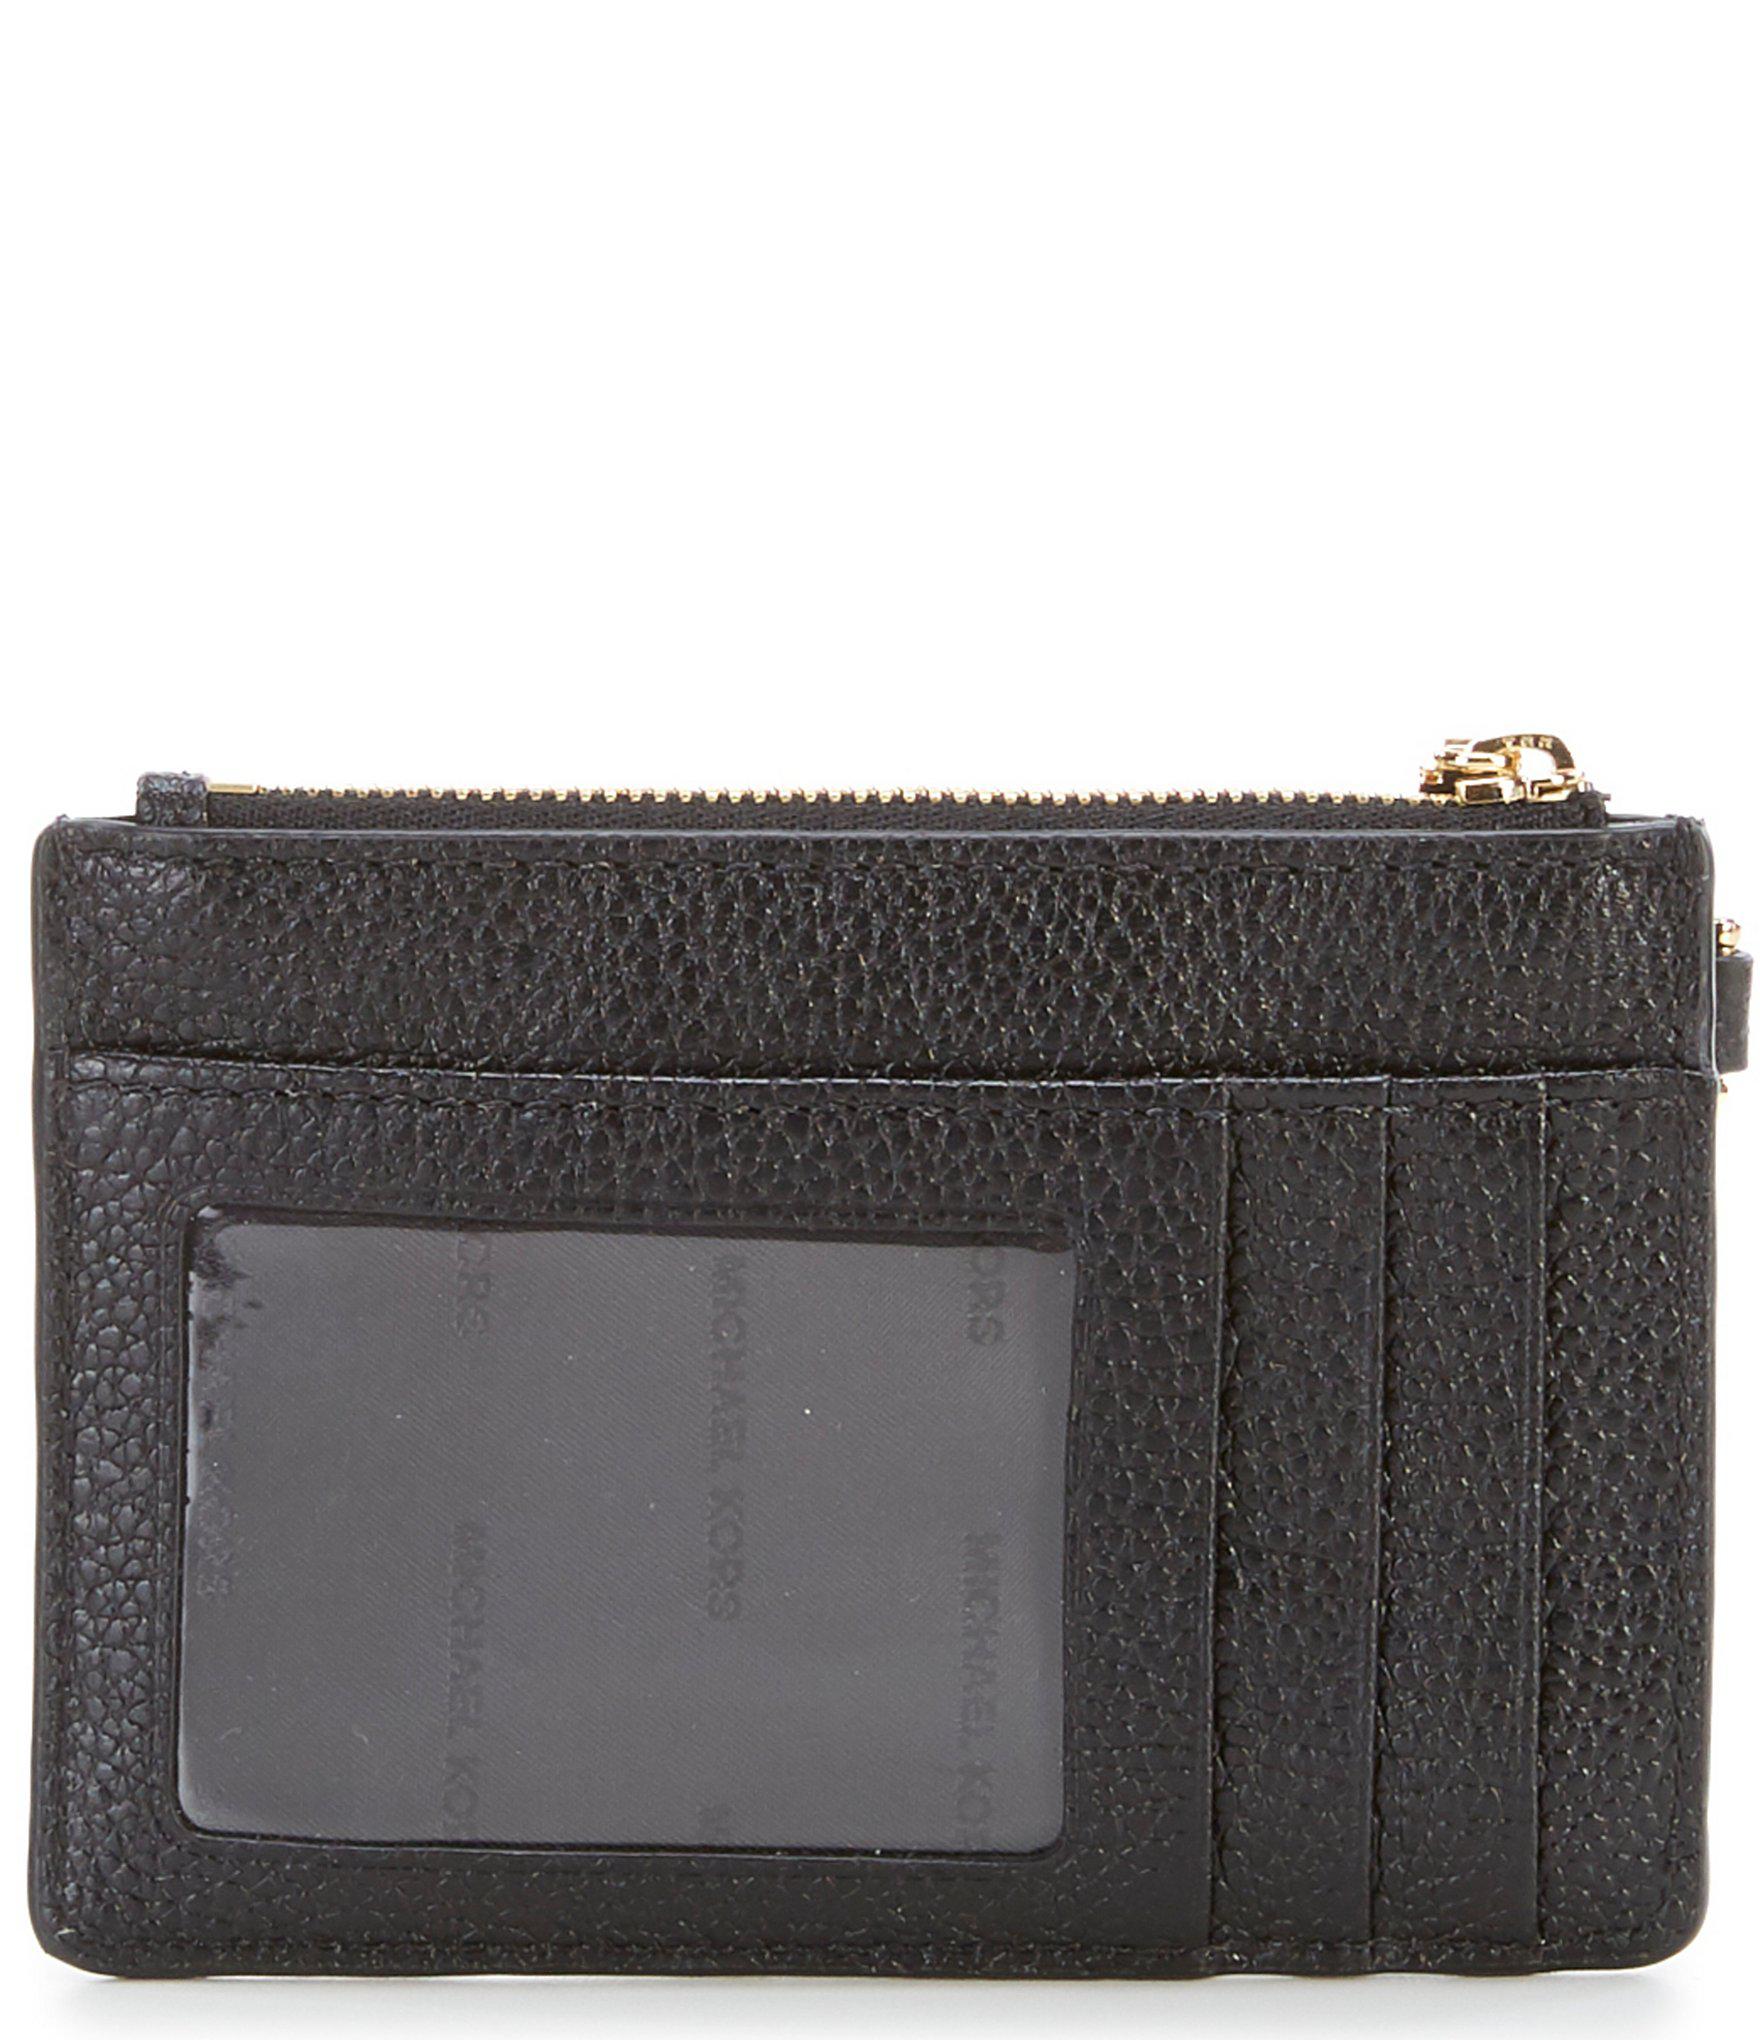 MICHAEL Michael Kors Leather Mercer Small Coin Purse in Black - Lyst